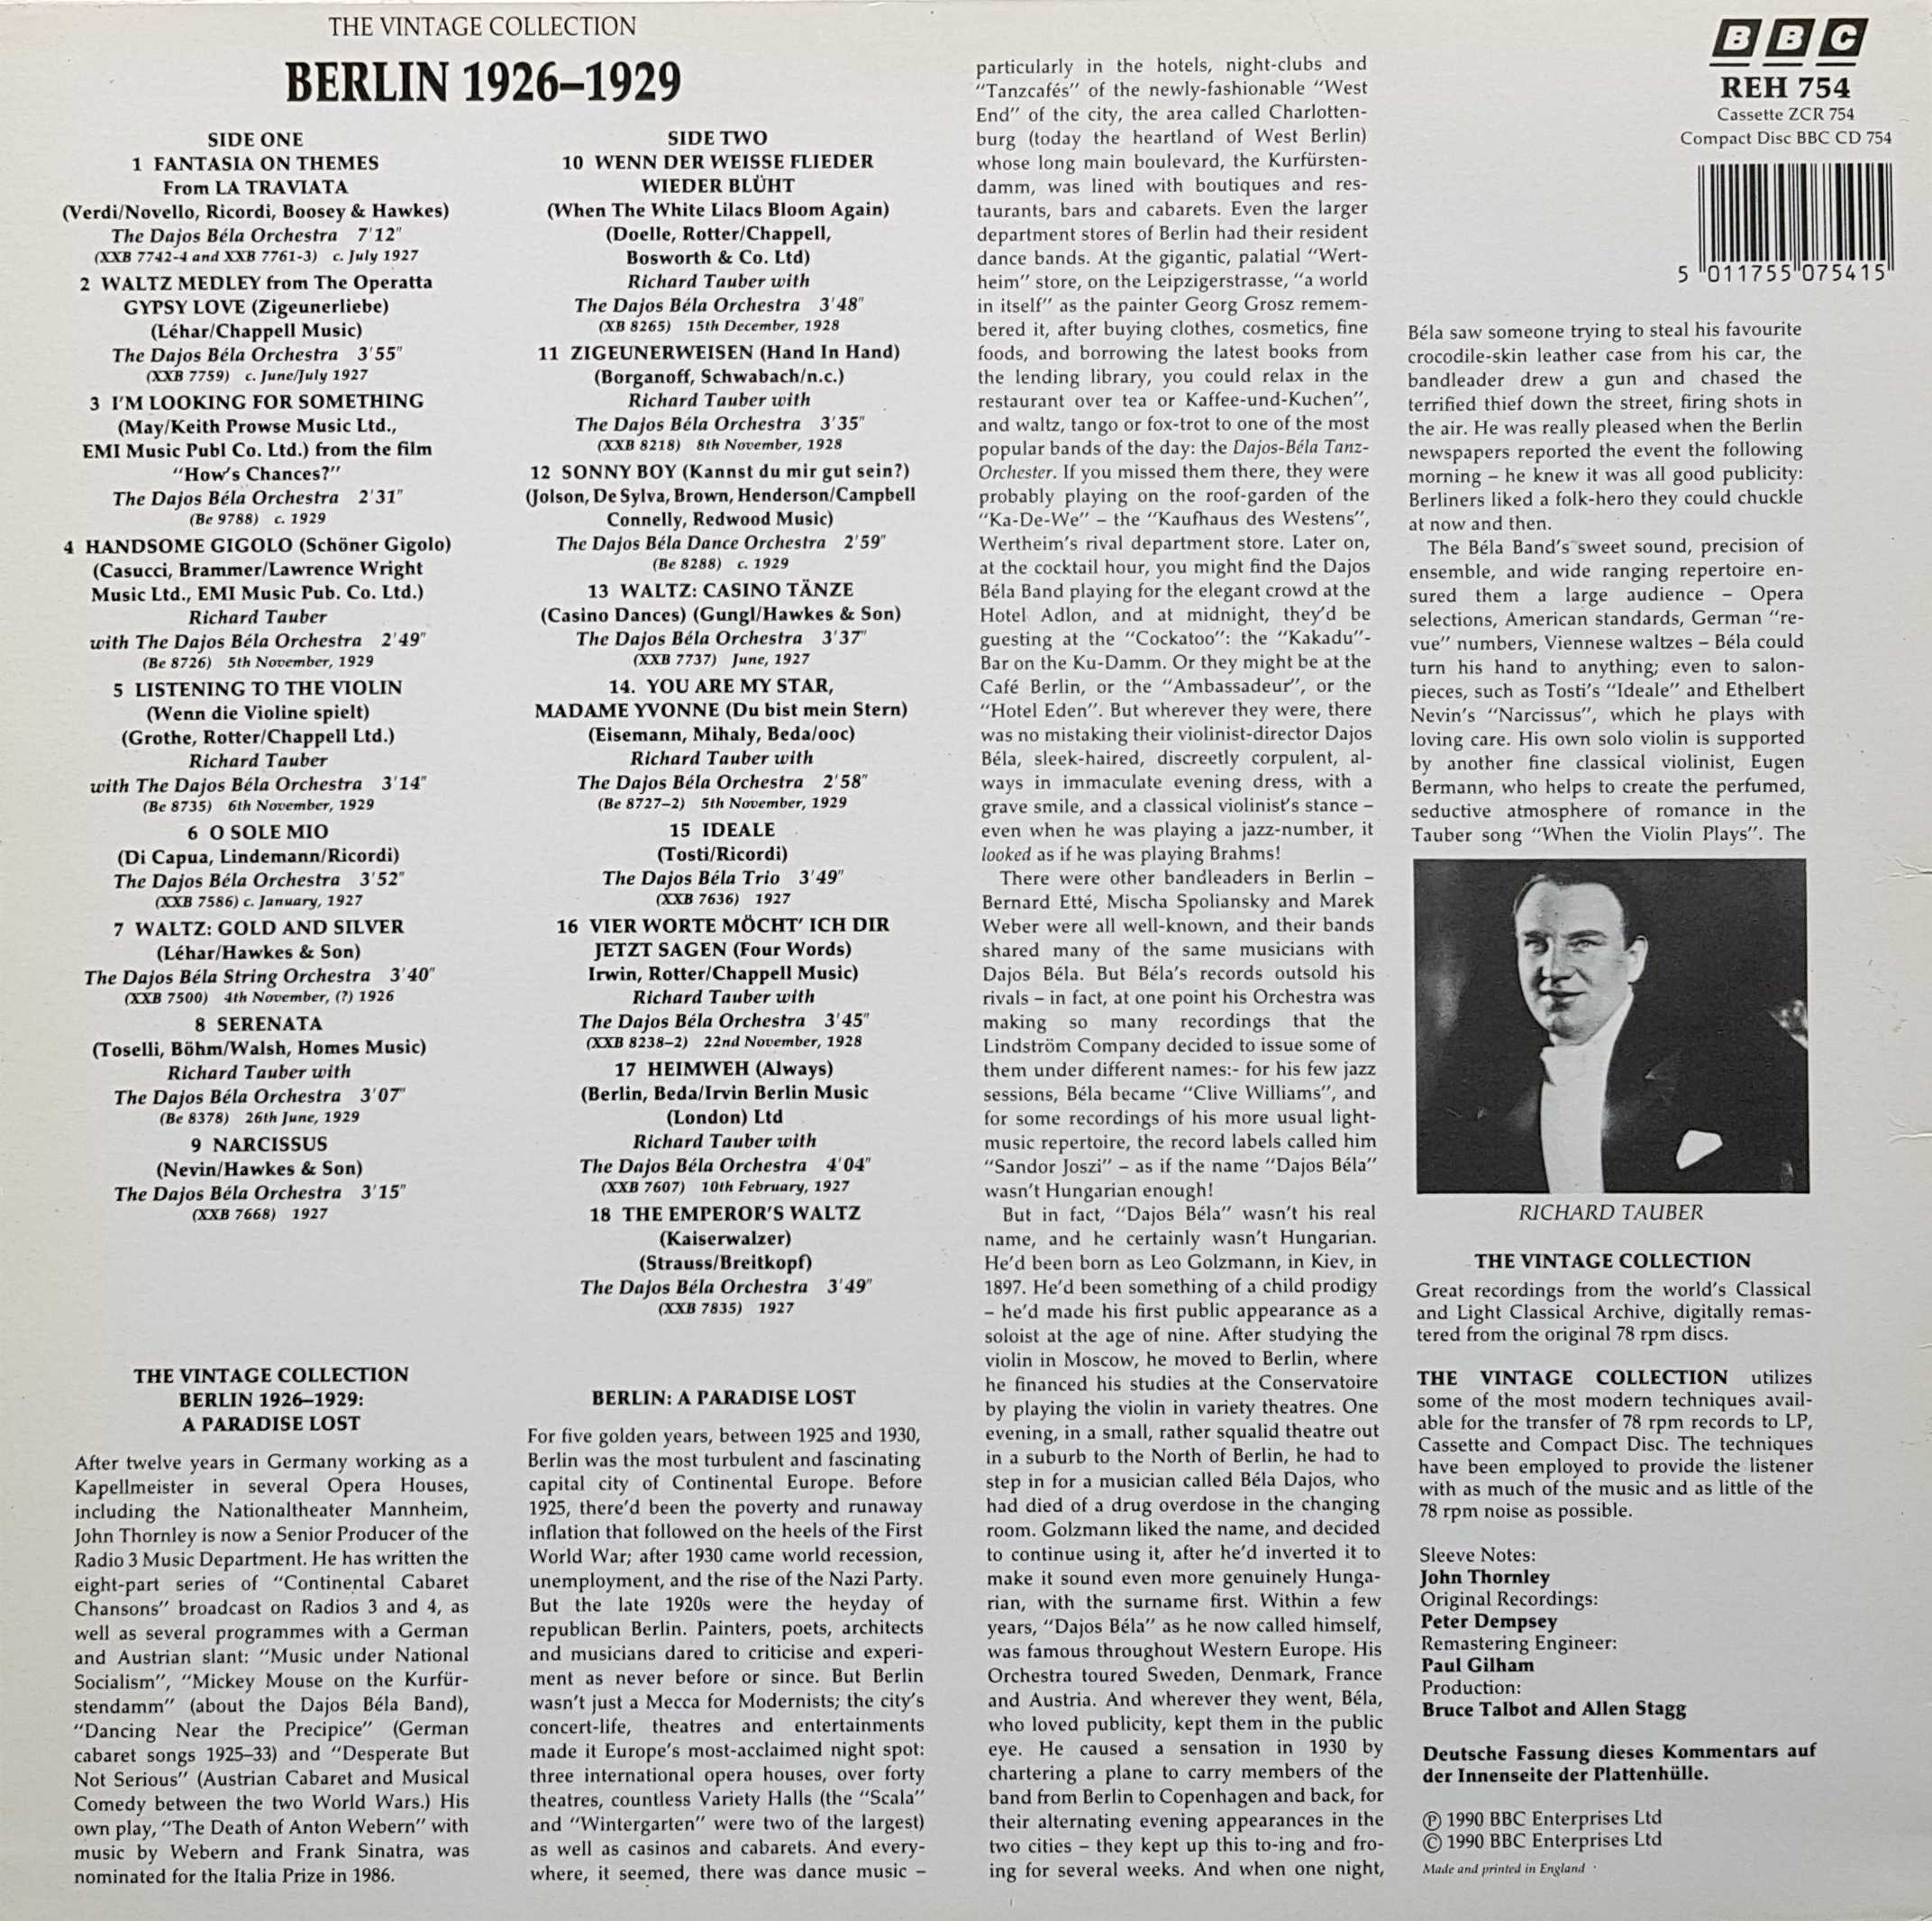 Picture of REH 754 The vintage collection - Berlin 1926 - 1929 by artist Various from the BBC records and Tapes library